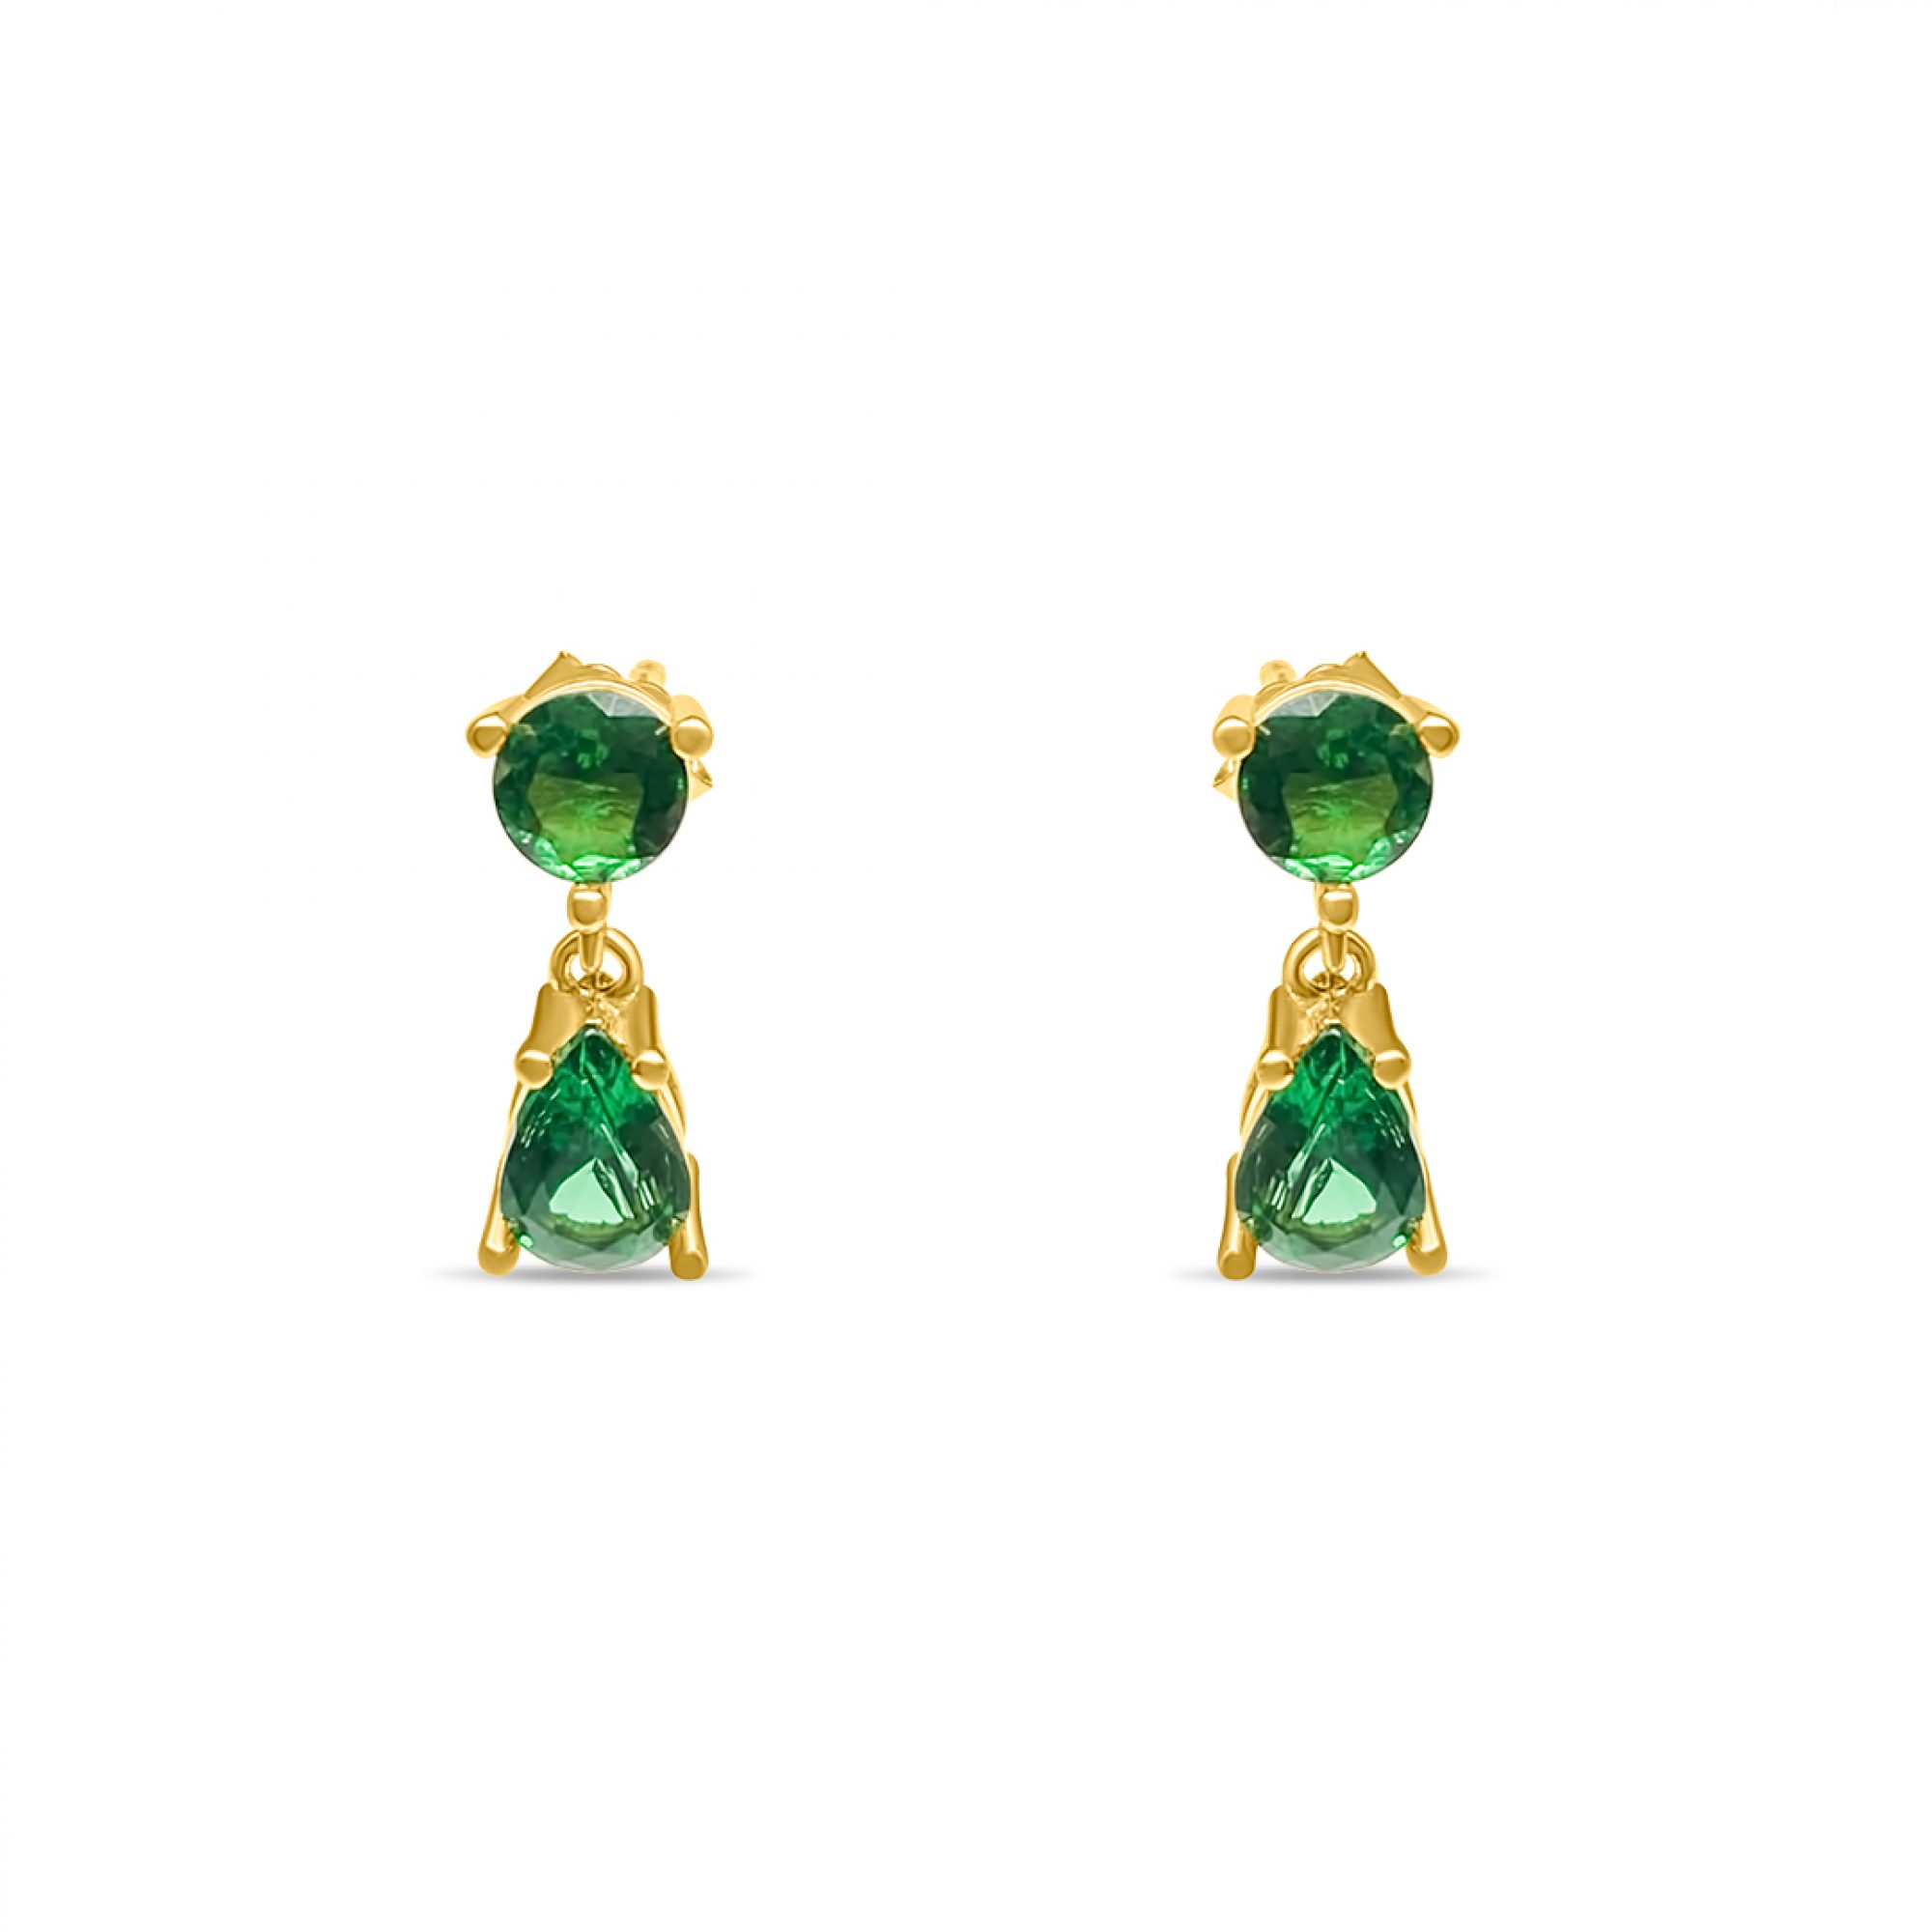 Gold plated earrings with emerald stones